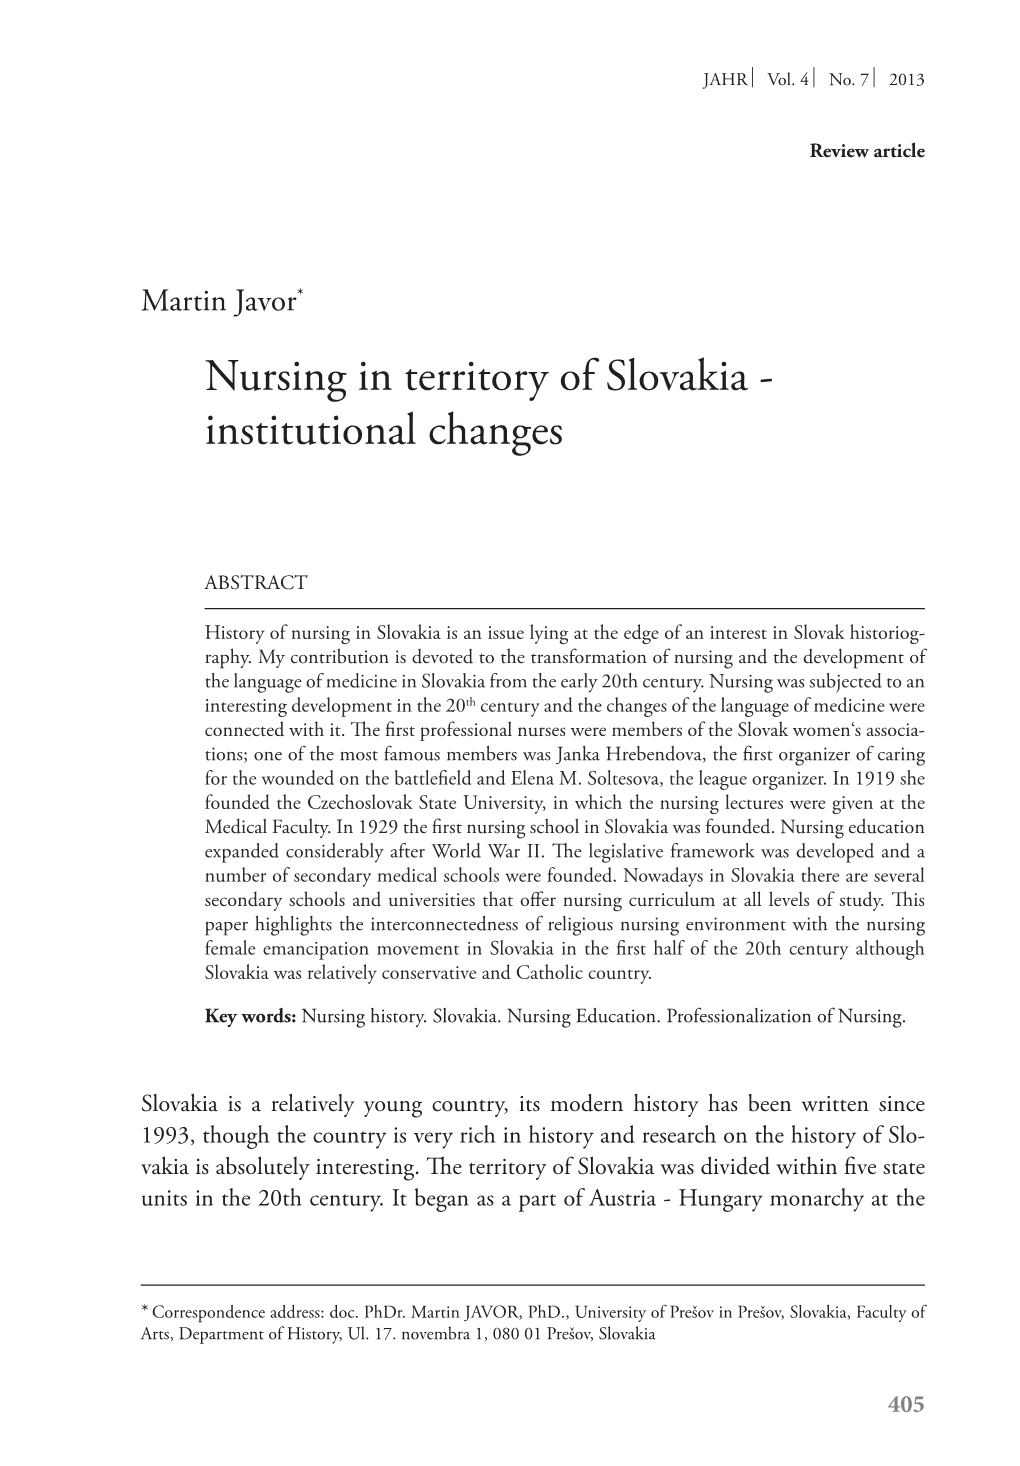 Nursing in Territory of Slovakia - Institutional Changes